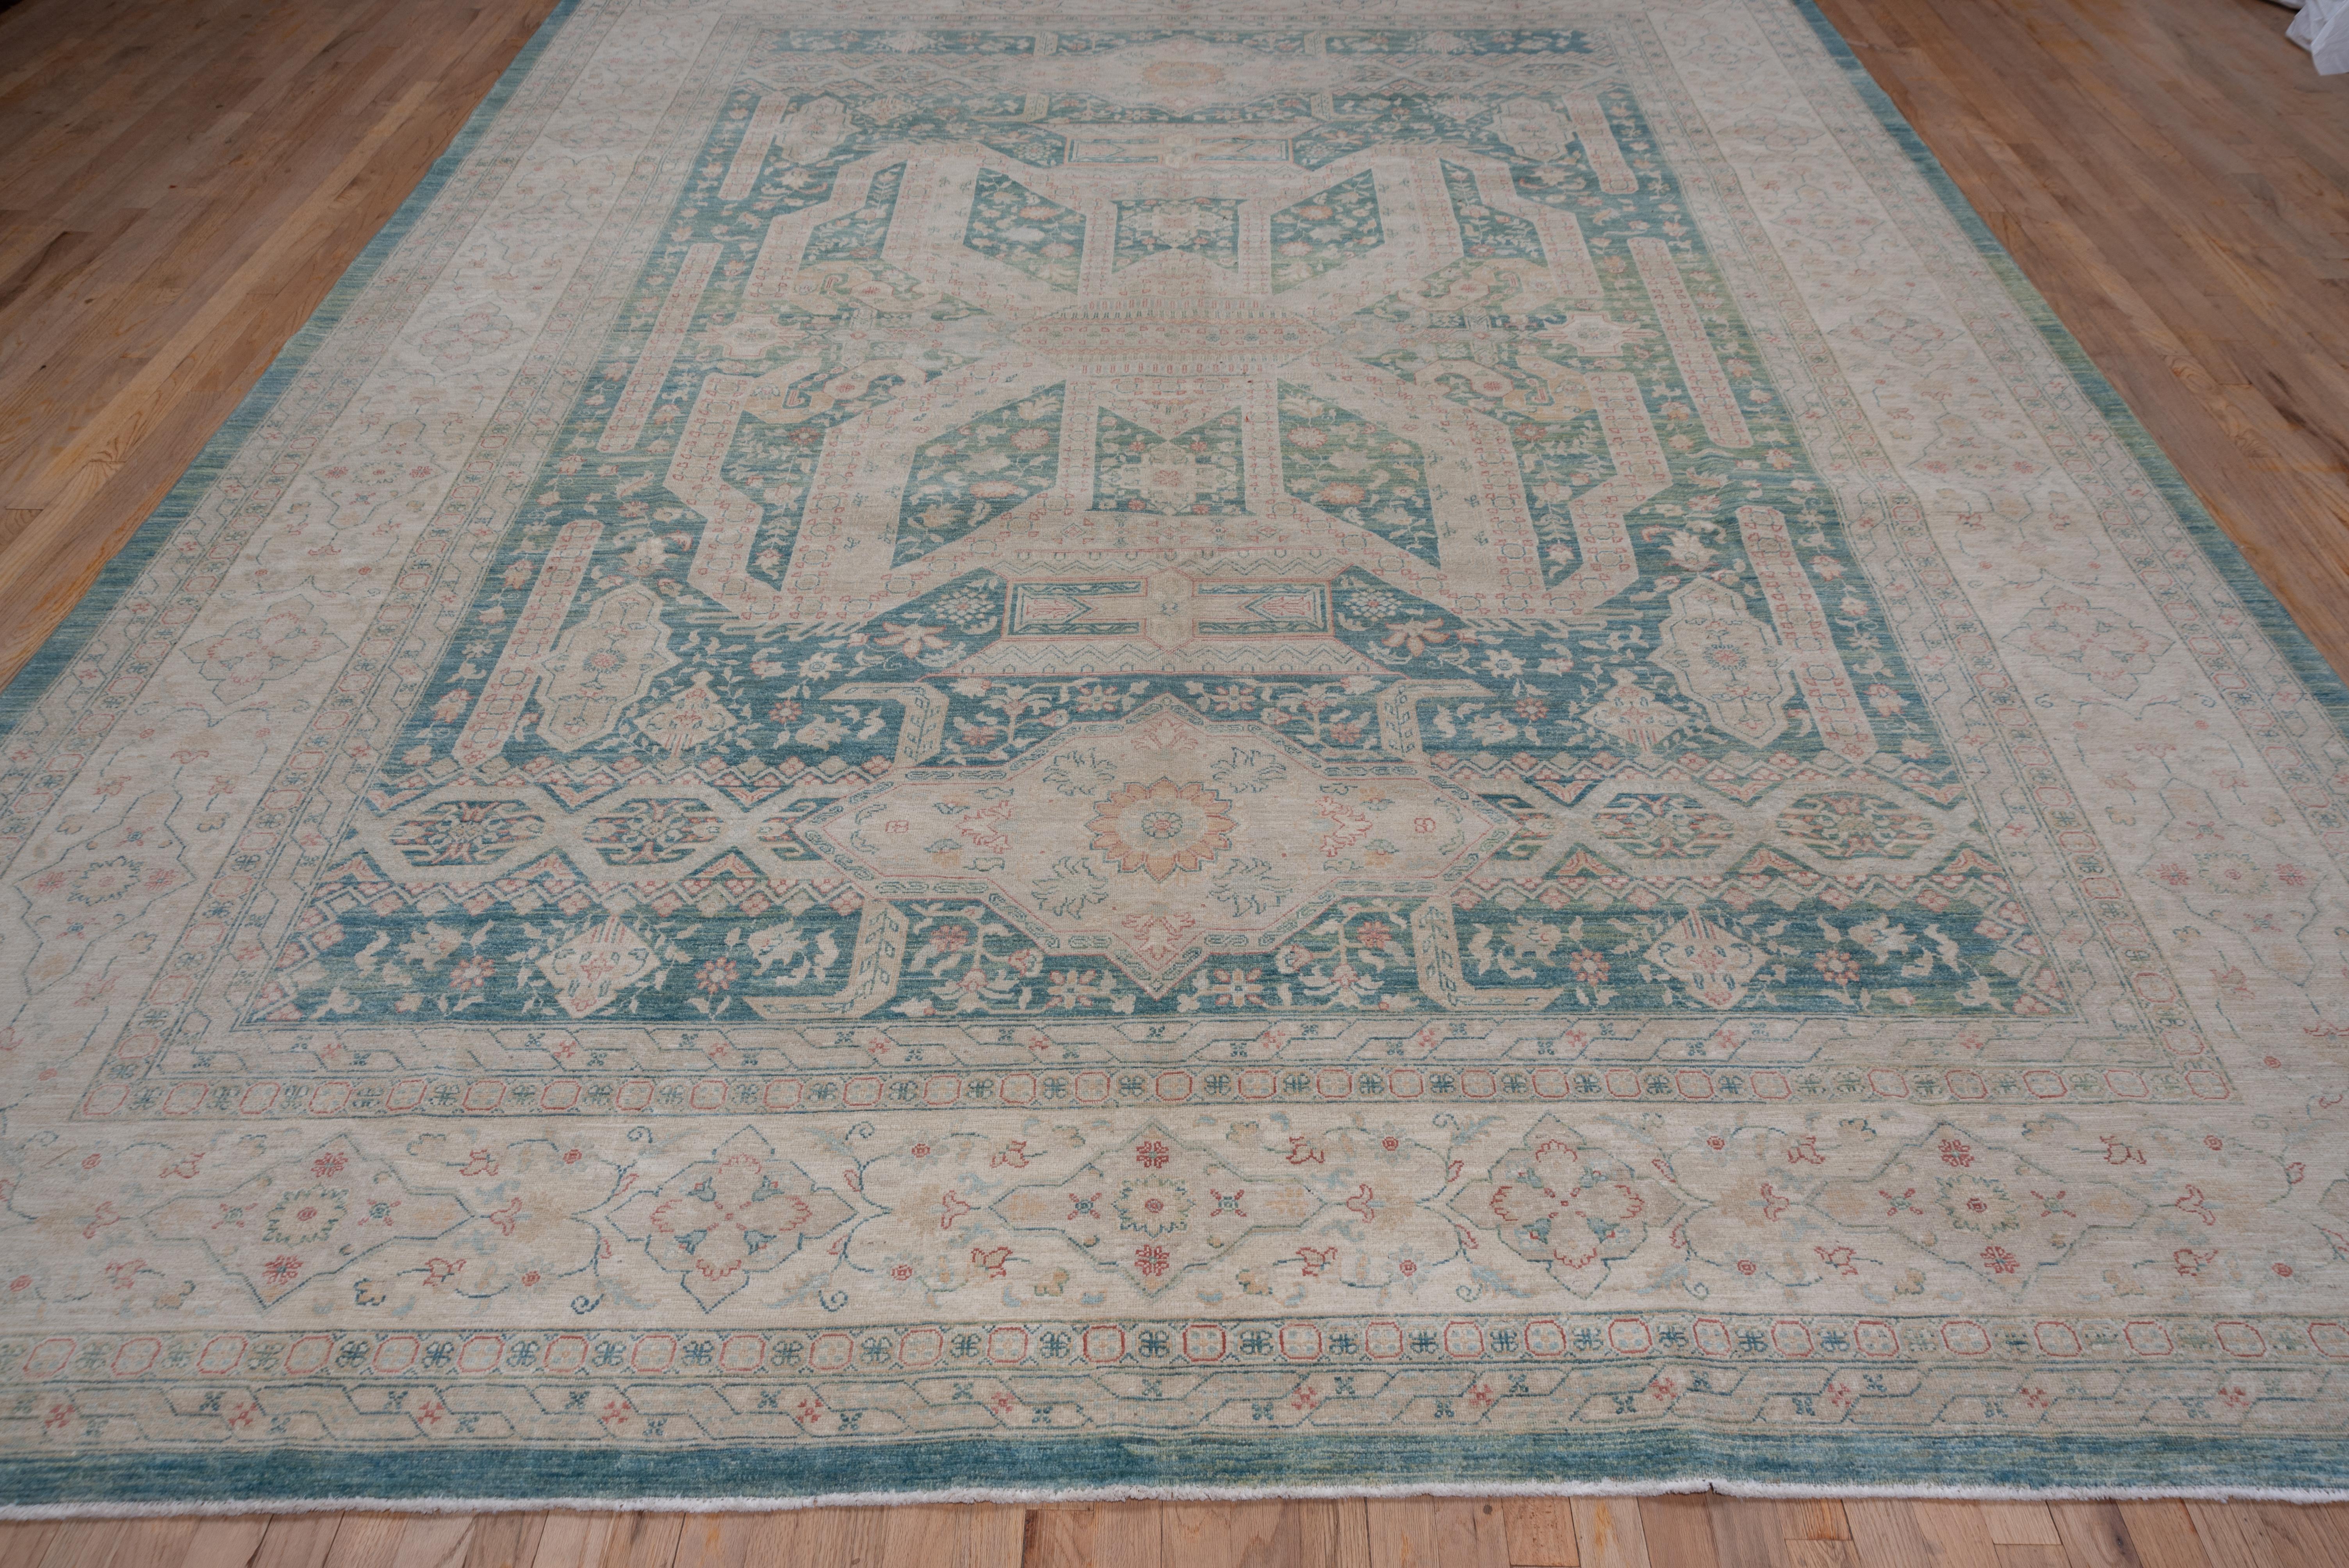 Contemporary Urban Hand Knotted Afghan Carpet, Teal and Green